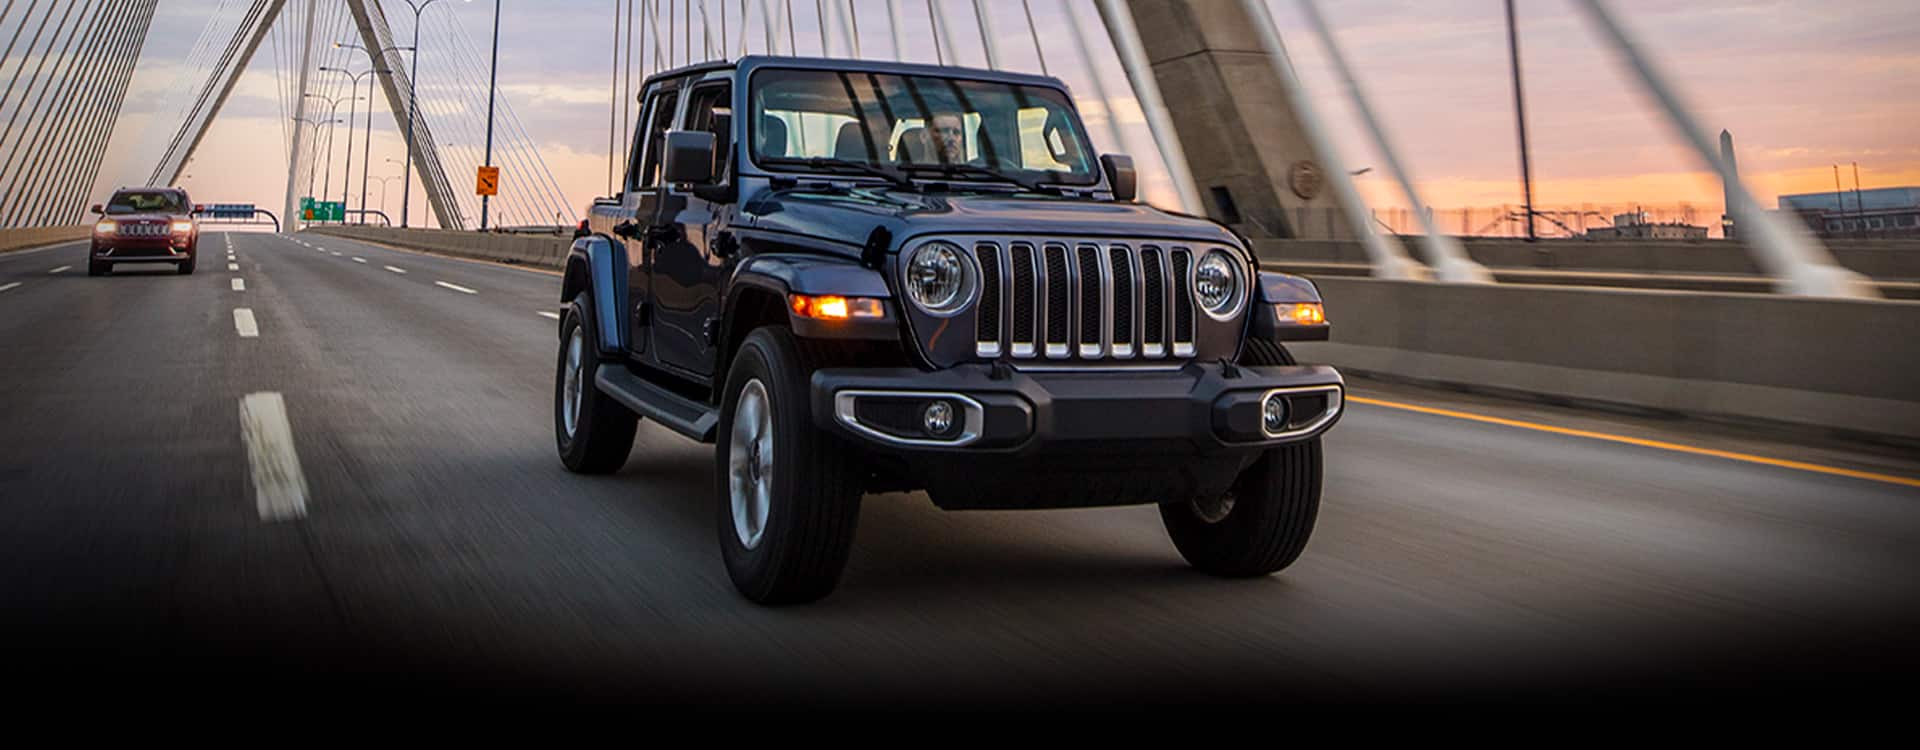 Are Jeep Wranglers Safe for New Drivers